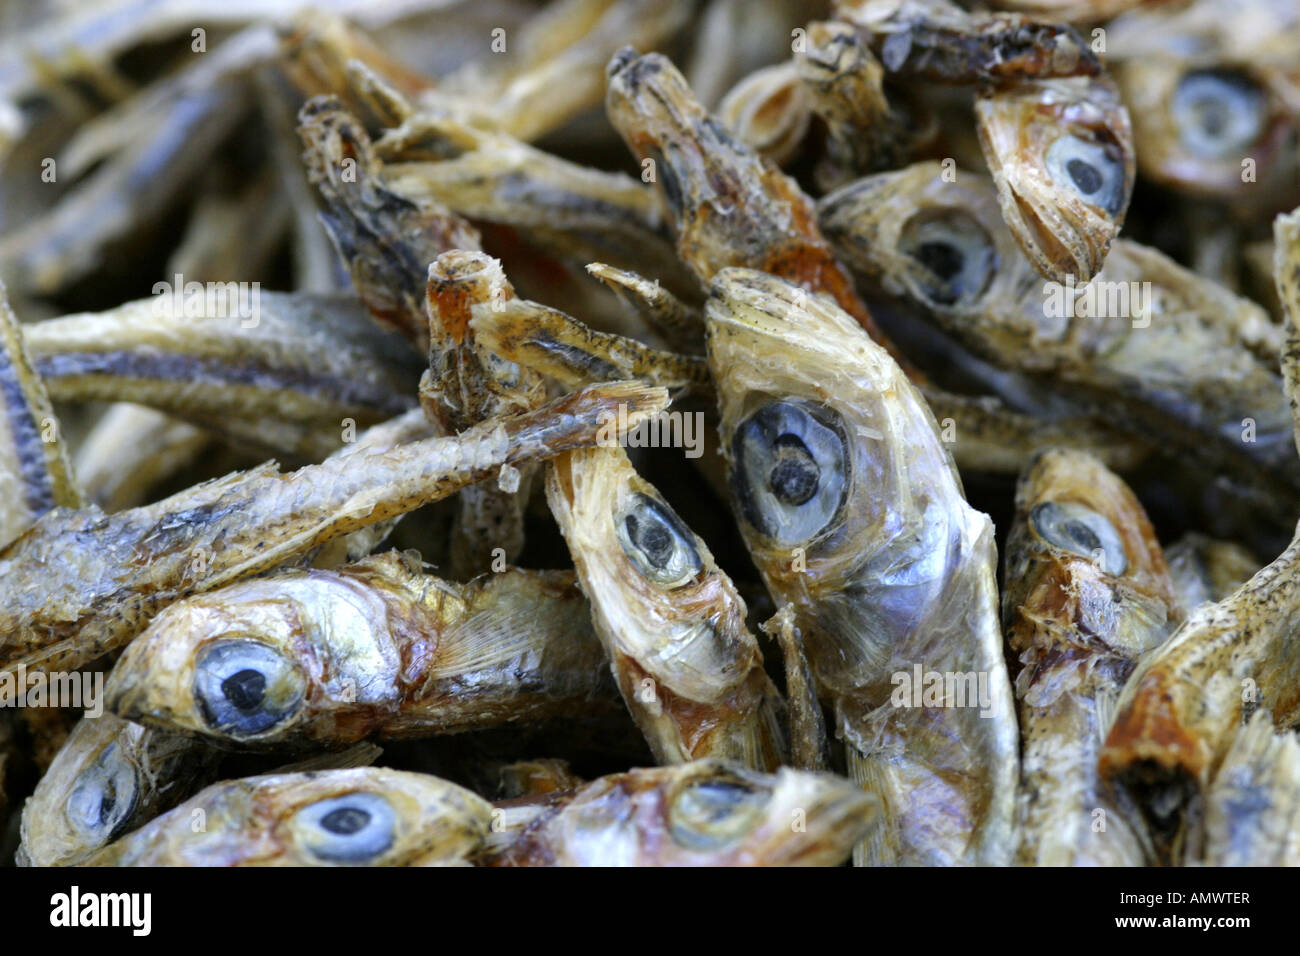 anchovy, European anchovy (Engraulis encrasicholus), dried anchovies Stock Photo